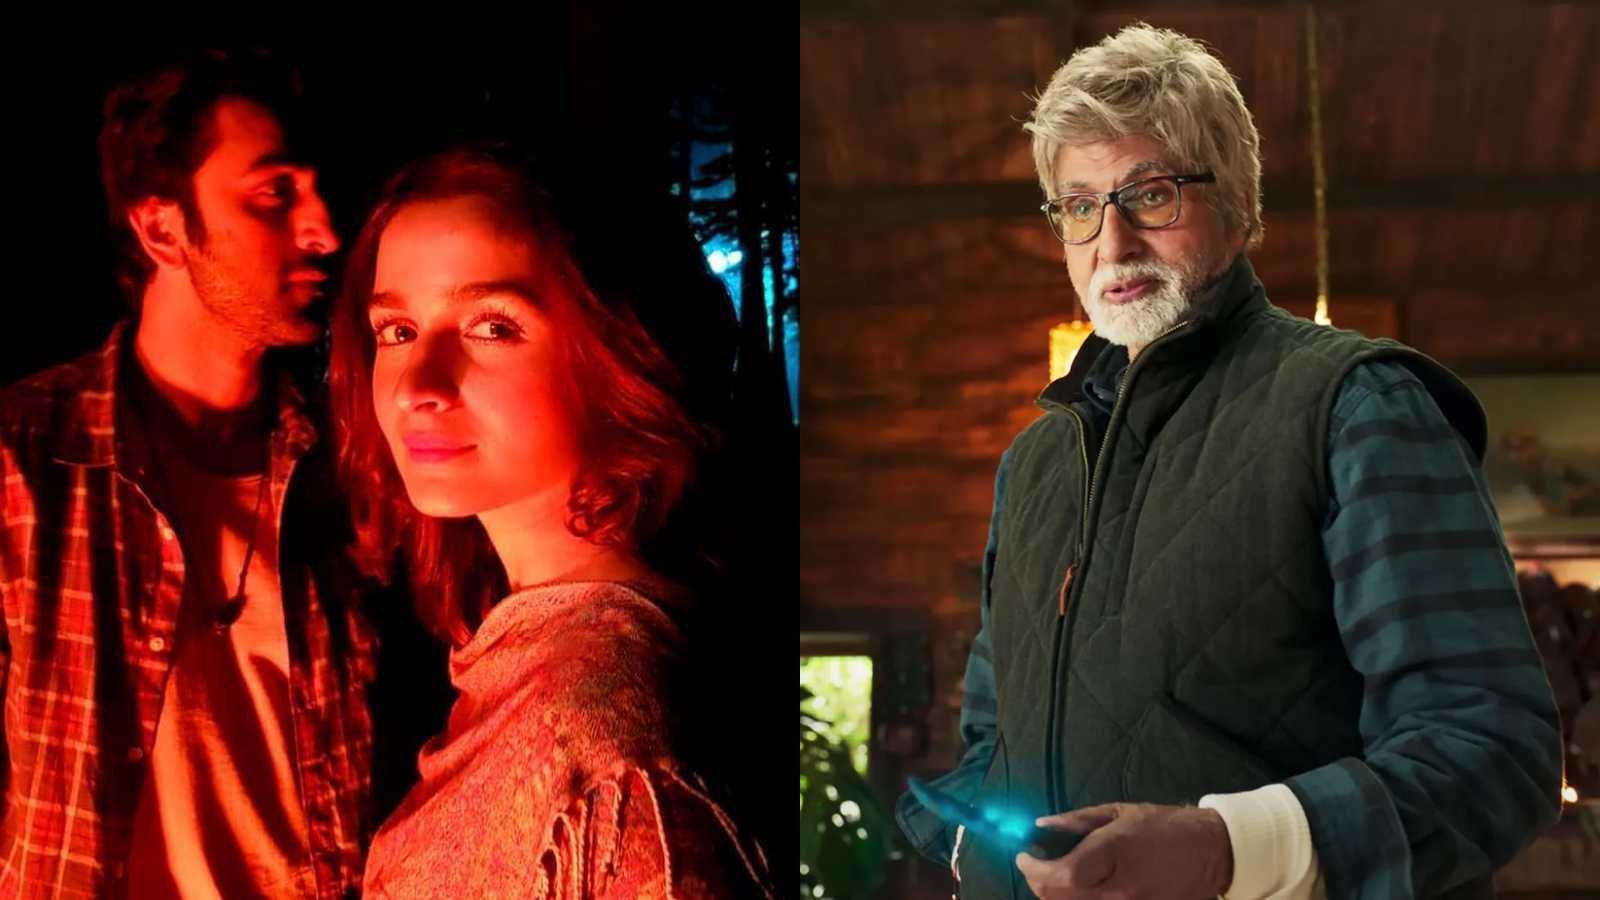 Alia Bhatt's make up artist found Amitabh Bachchan 'so hot' in Brahmastra, we bet you'd agree with the actress' reaction